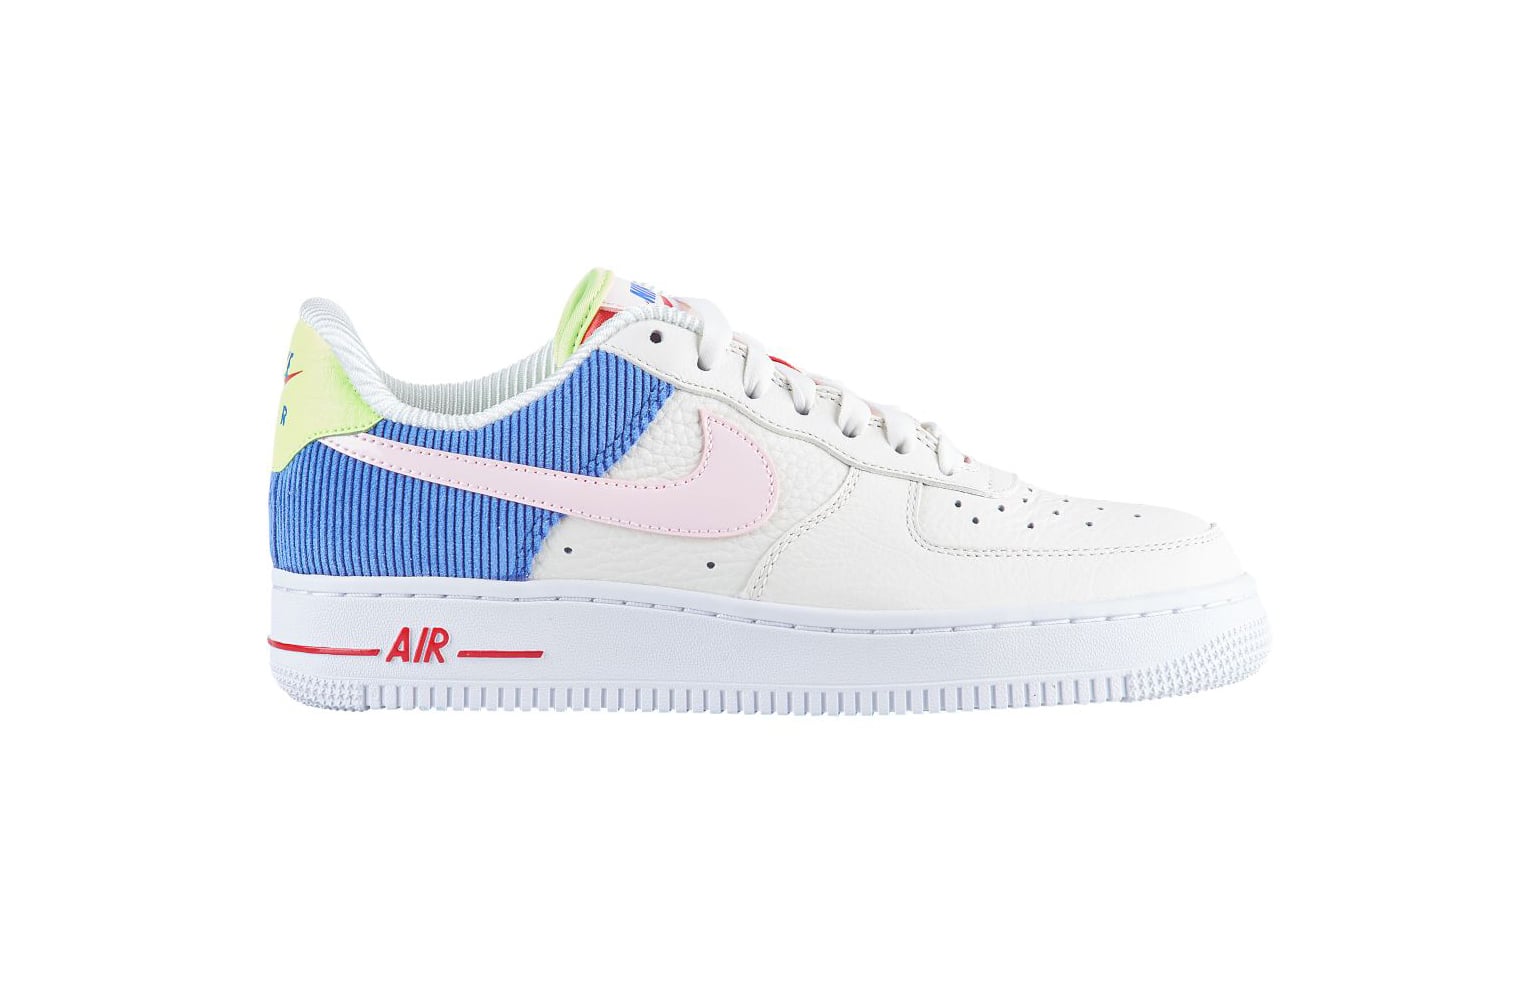 nike air force 1 07 low white womens